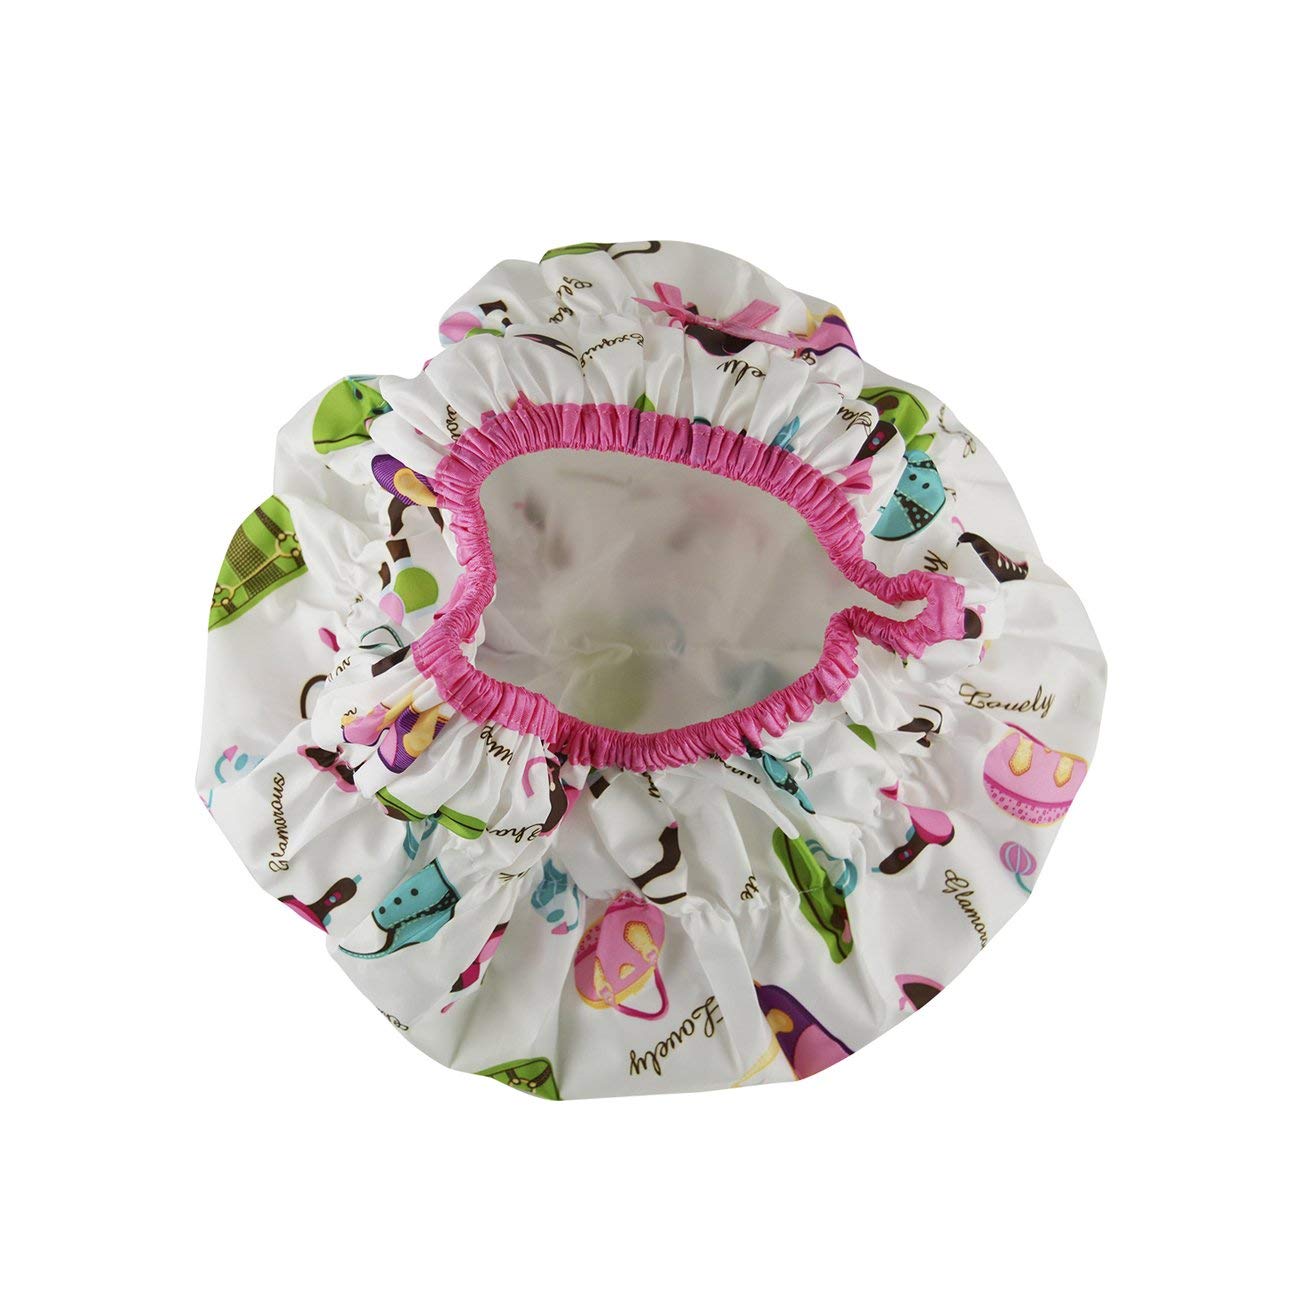 Reusable Shower Cap & Bath Cap, Lined, Oversized Waterproof Shower Caps Large Designed for all Hair Lengths with Lining & Elastic Band Stretch Hem Hair Hat - Fashionista Diva